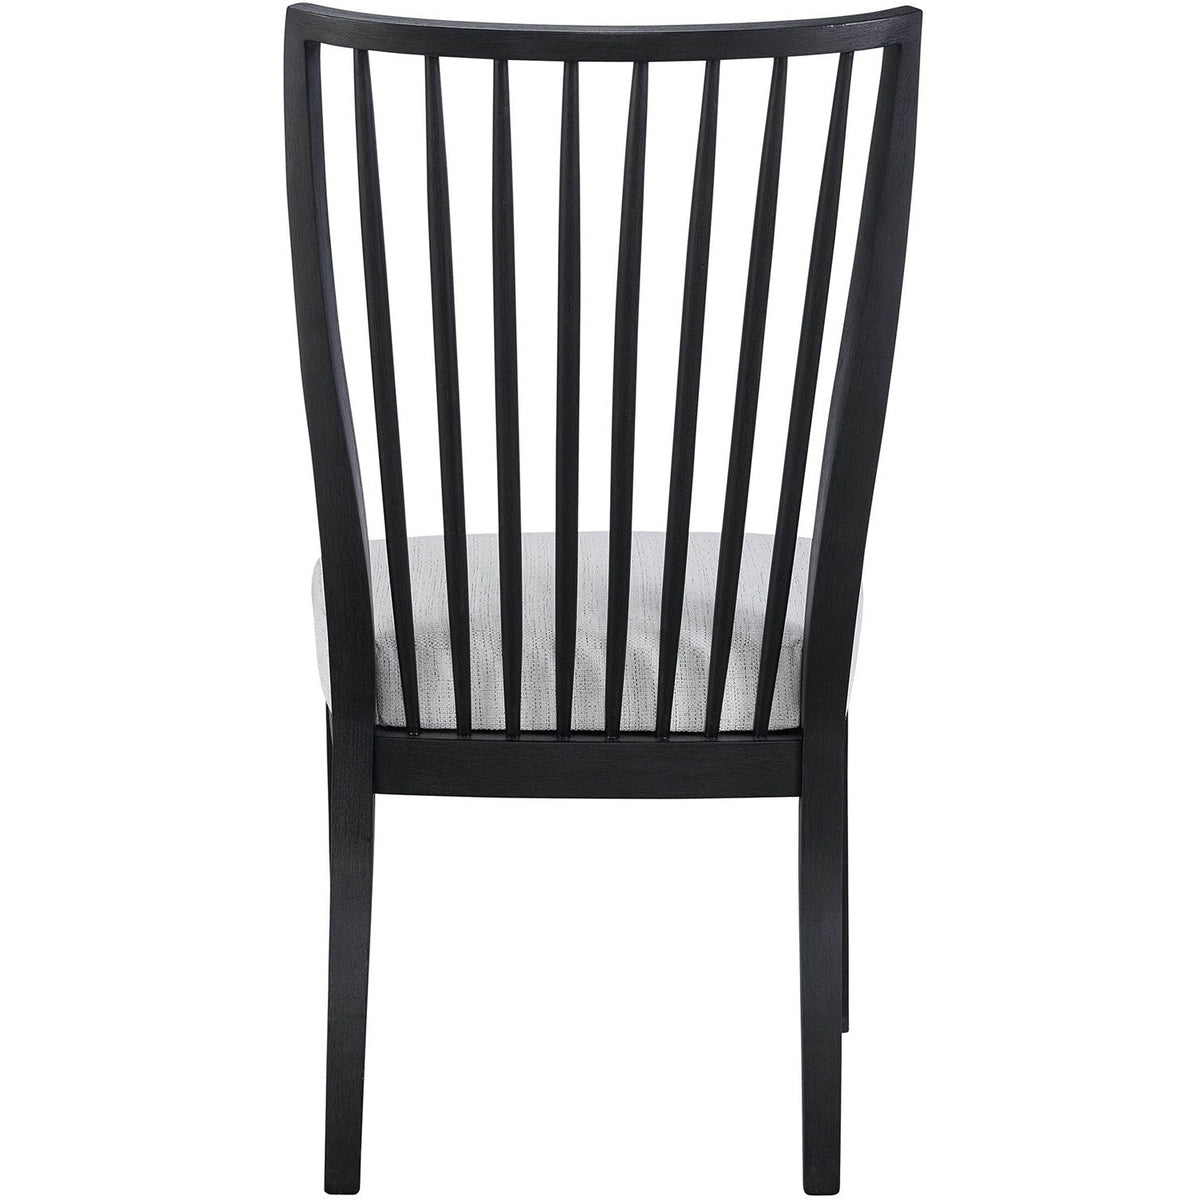 Bowen Side Chair Charcoal - Be Bold Furniture